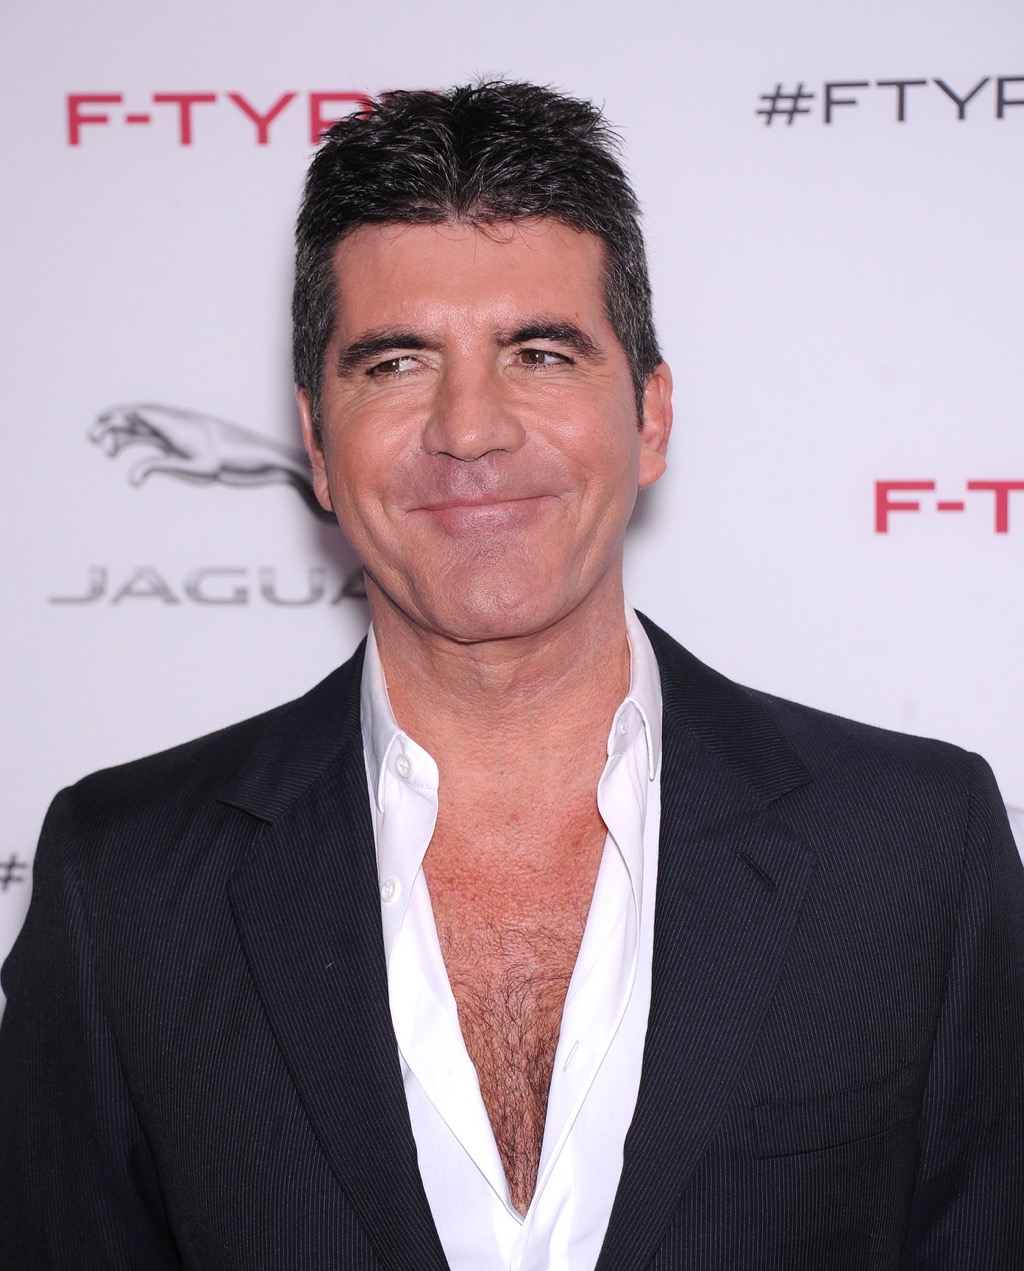 simon cowell became famous after 40